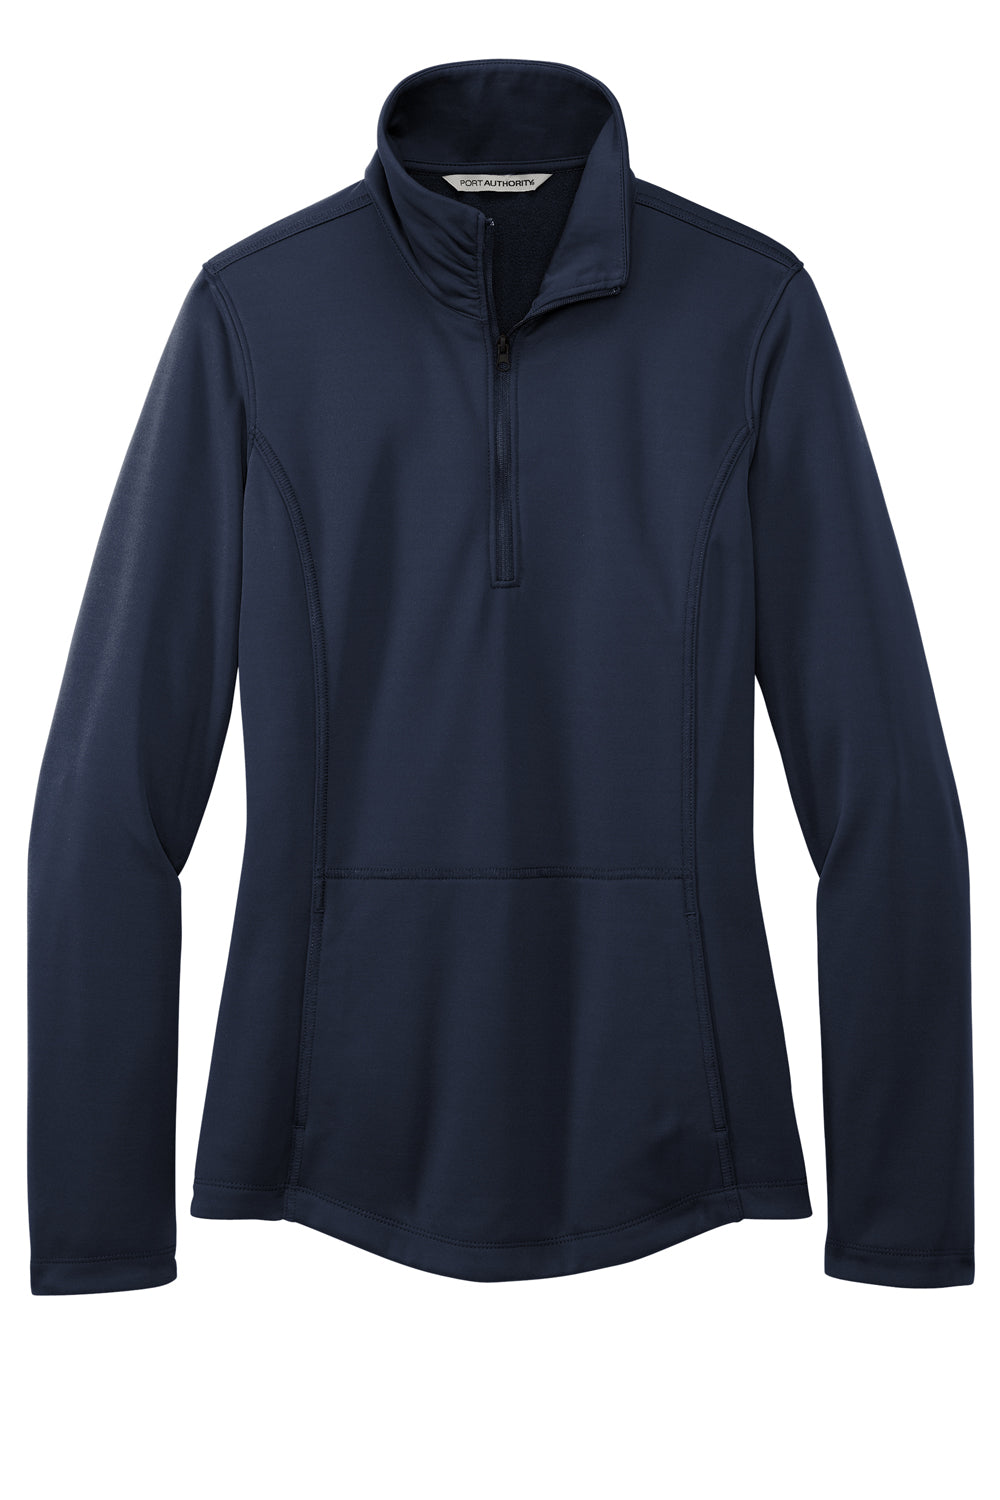 Port Authority L804 Womens Smooth Fleece 1/4 Zip Hooded Jacket River Navy Blue Flat Front